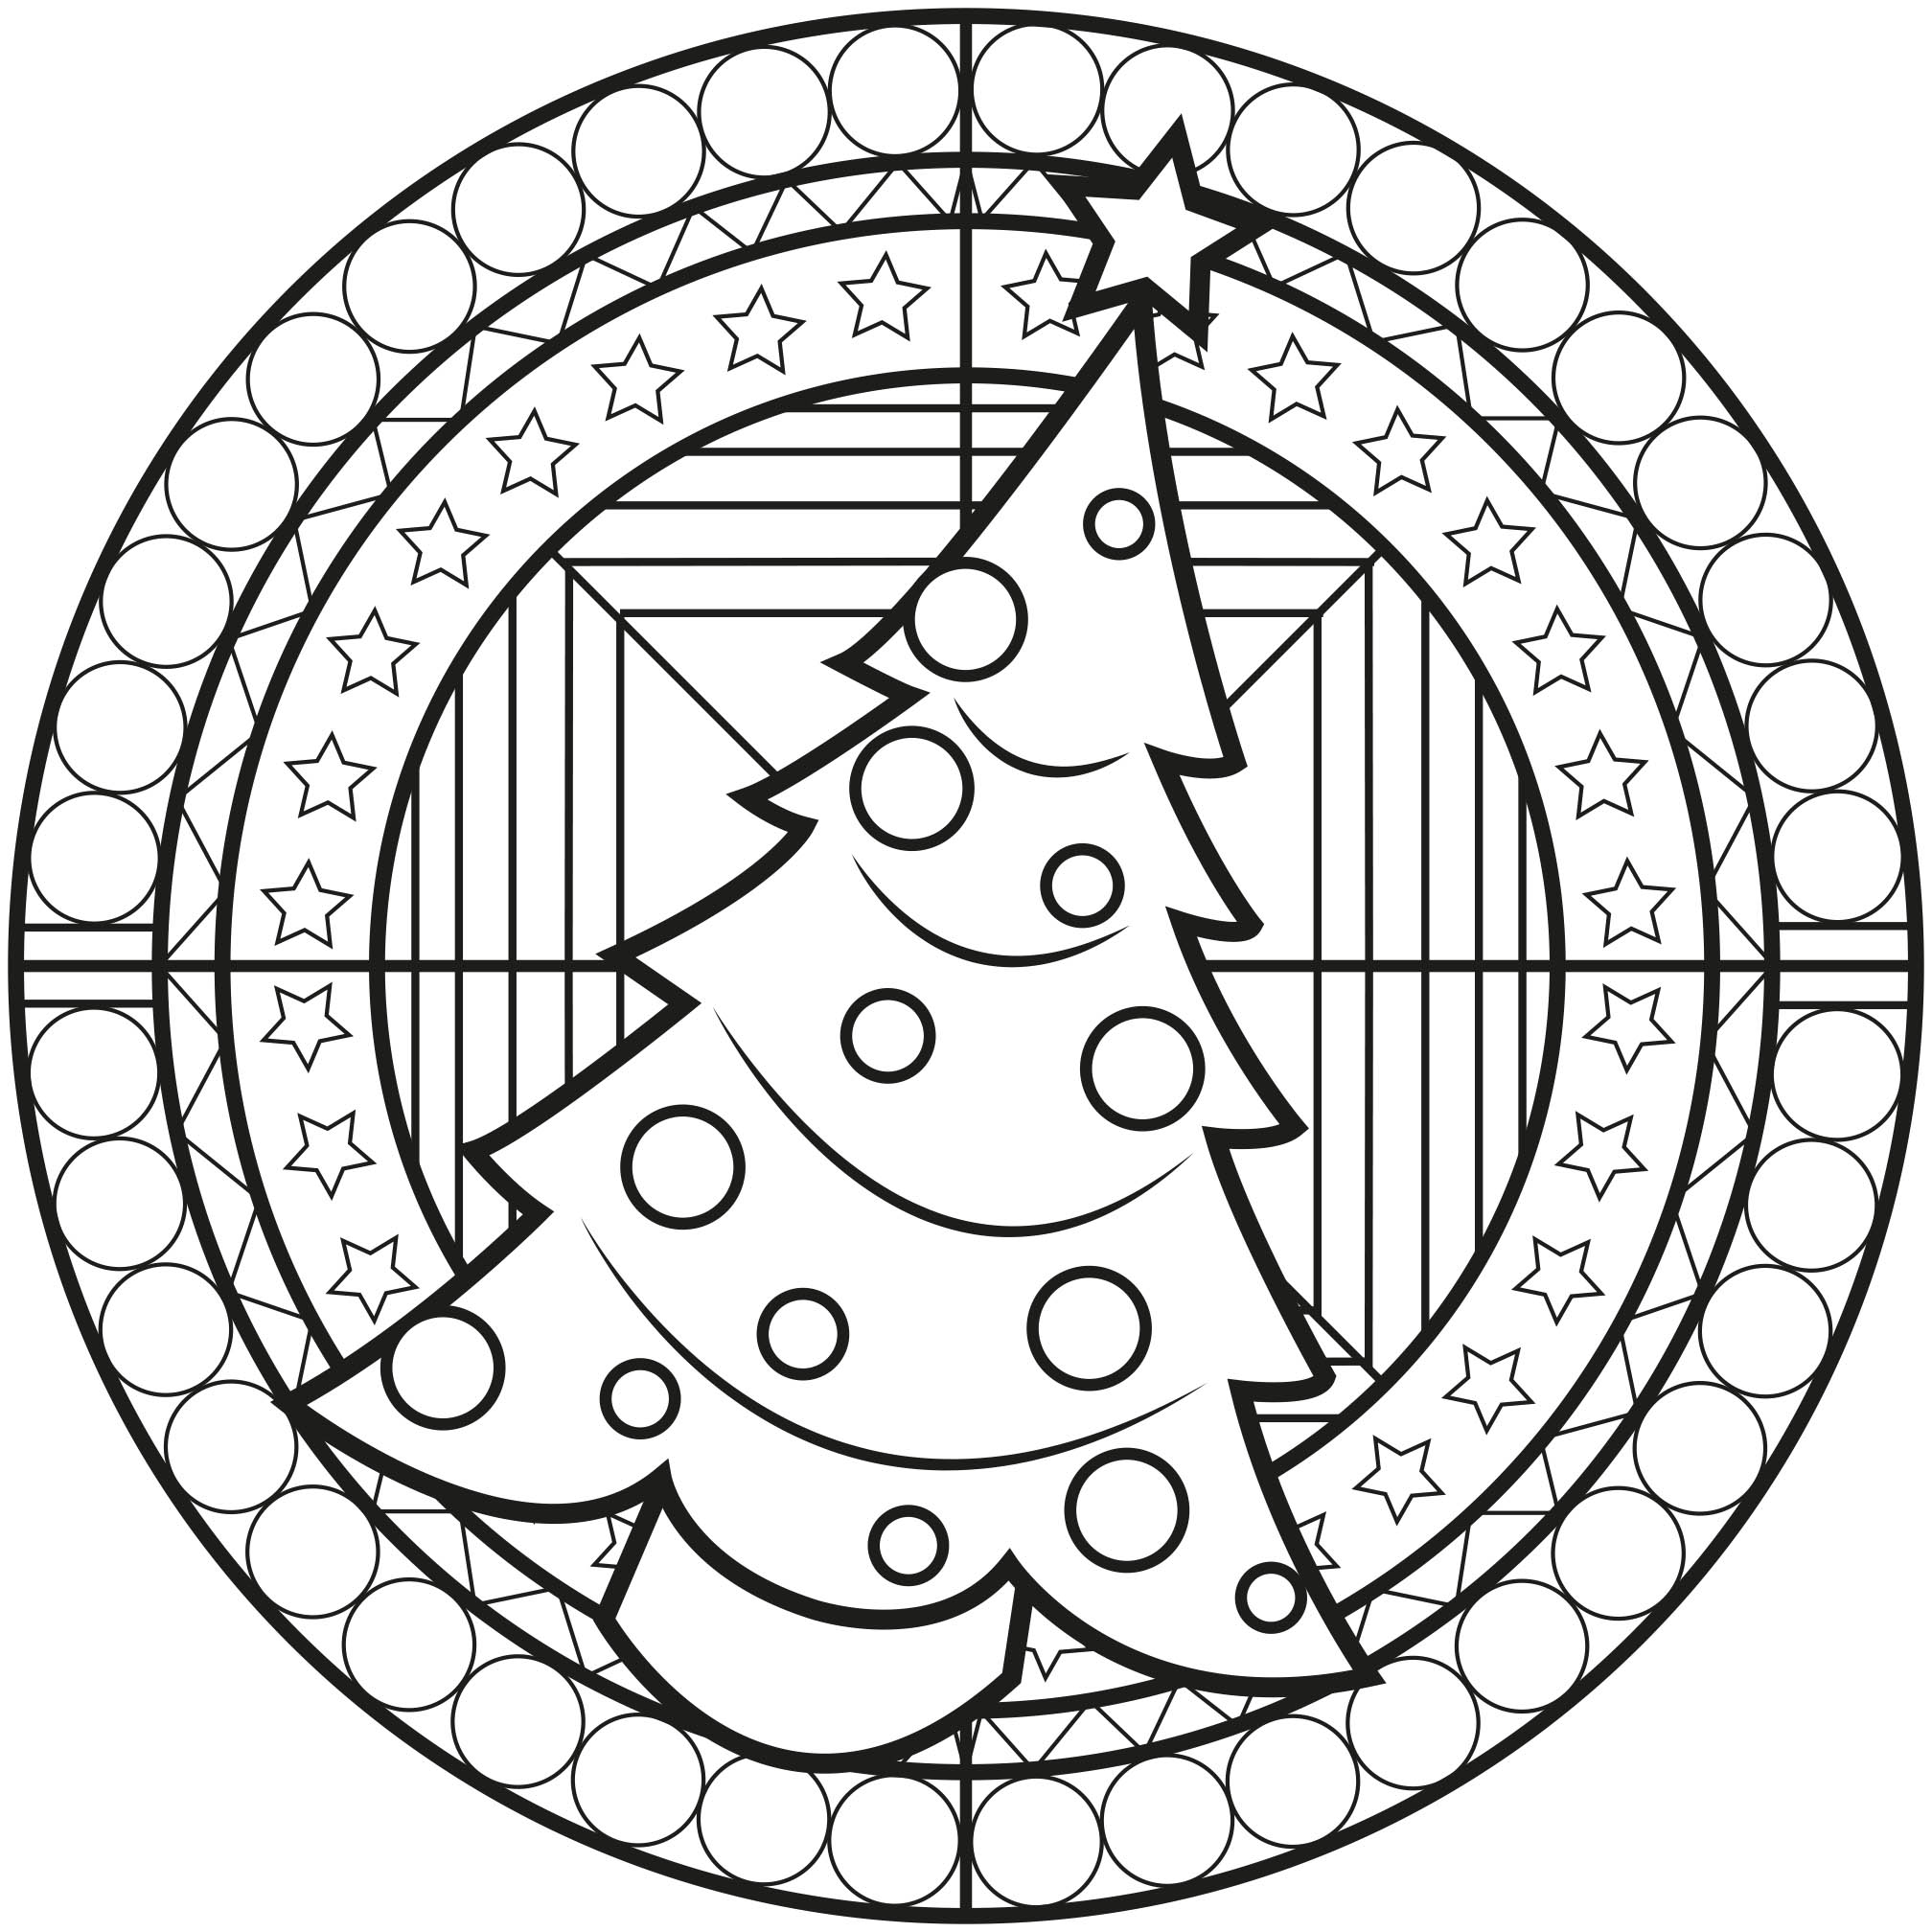 Download Chrstmas Mandala with a Christmas Tree - M&alas Adult Coloring Pages